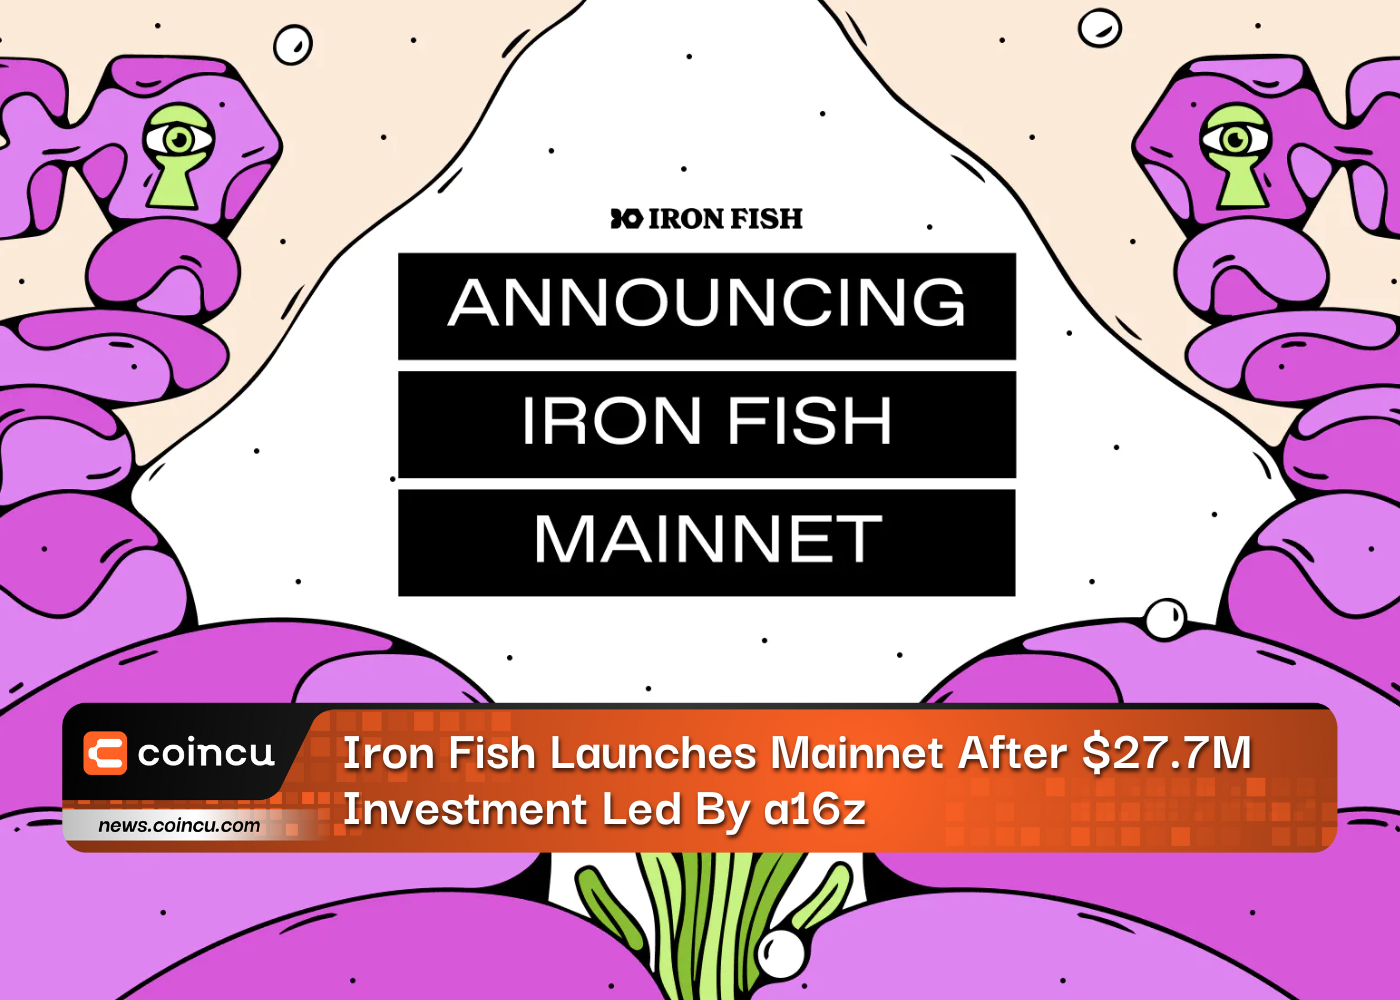 Iron Fish Launches Mainnet After $27.7M Investment Led By a16z